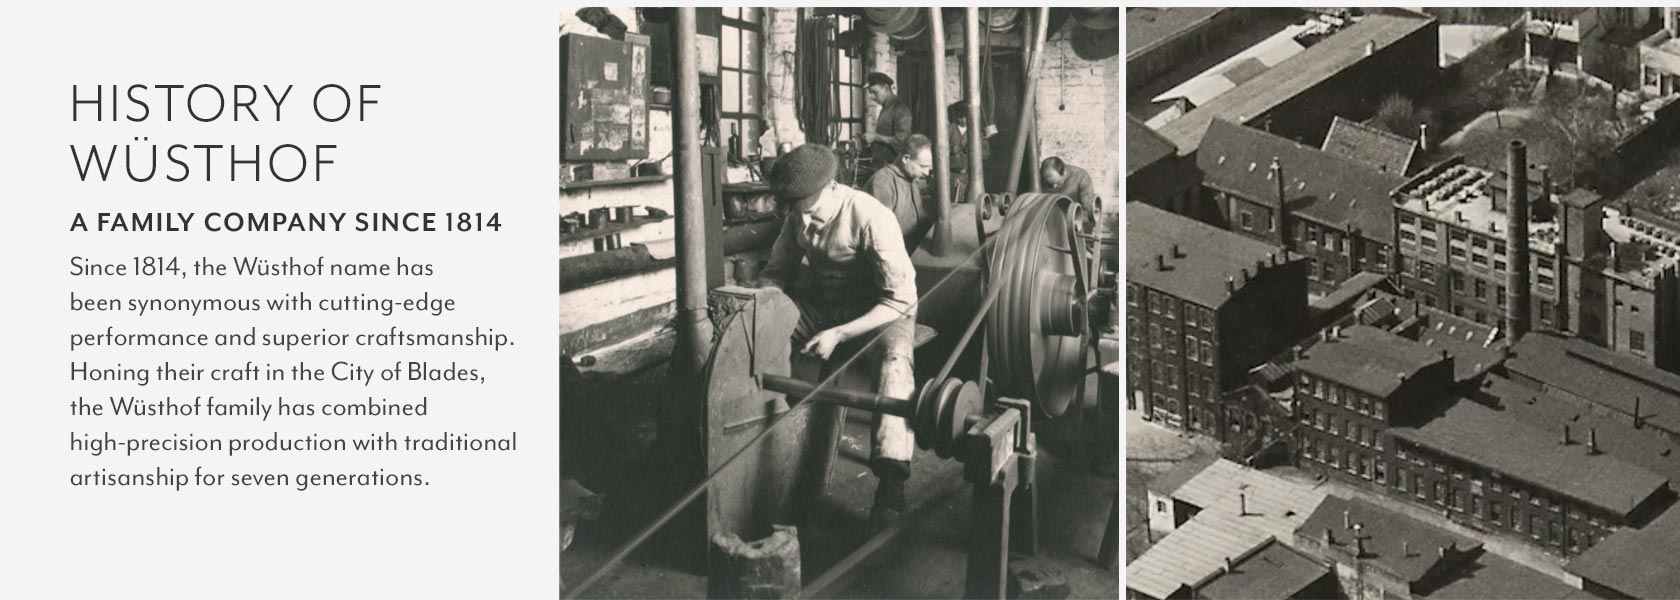 History of Wüshtof. A FAMILY COMPANY SINCE 1814. Since 1814, the Wüsthof name has been synonymous with cutting-edge performance and superior craftsmanship. Honing their craft in the City of Blades, the Wüsthof family has combined high-precision production with traditional artisanship for seven generations.